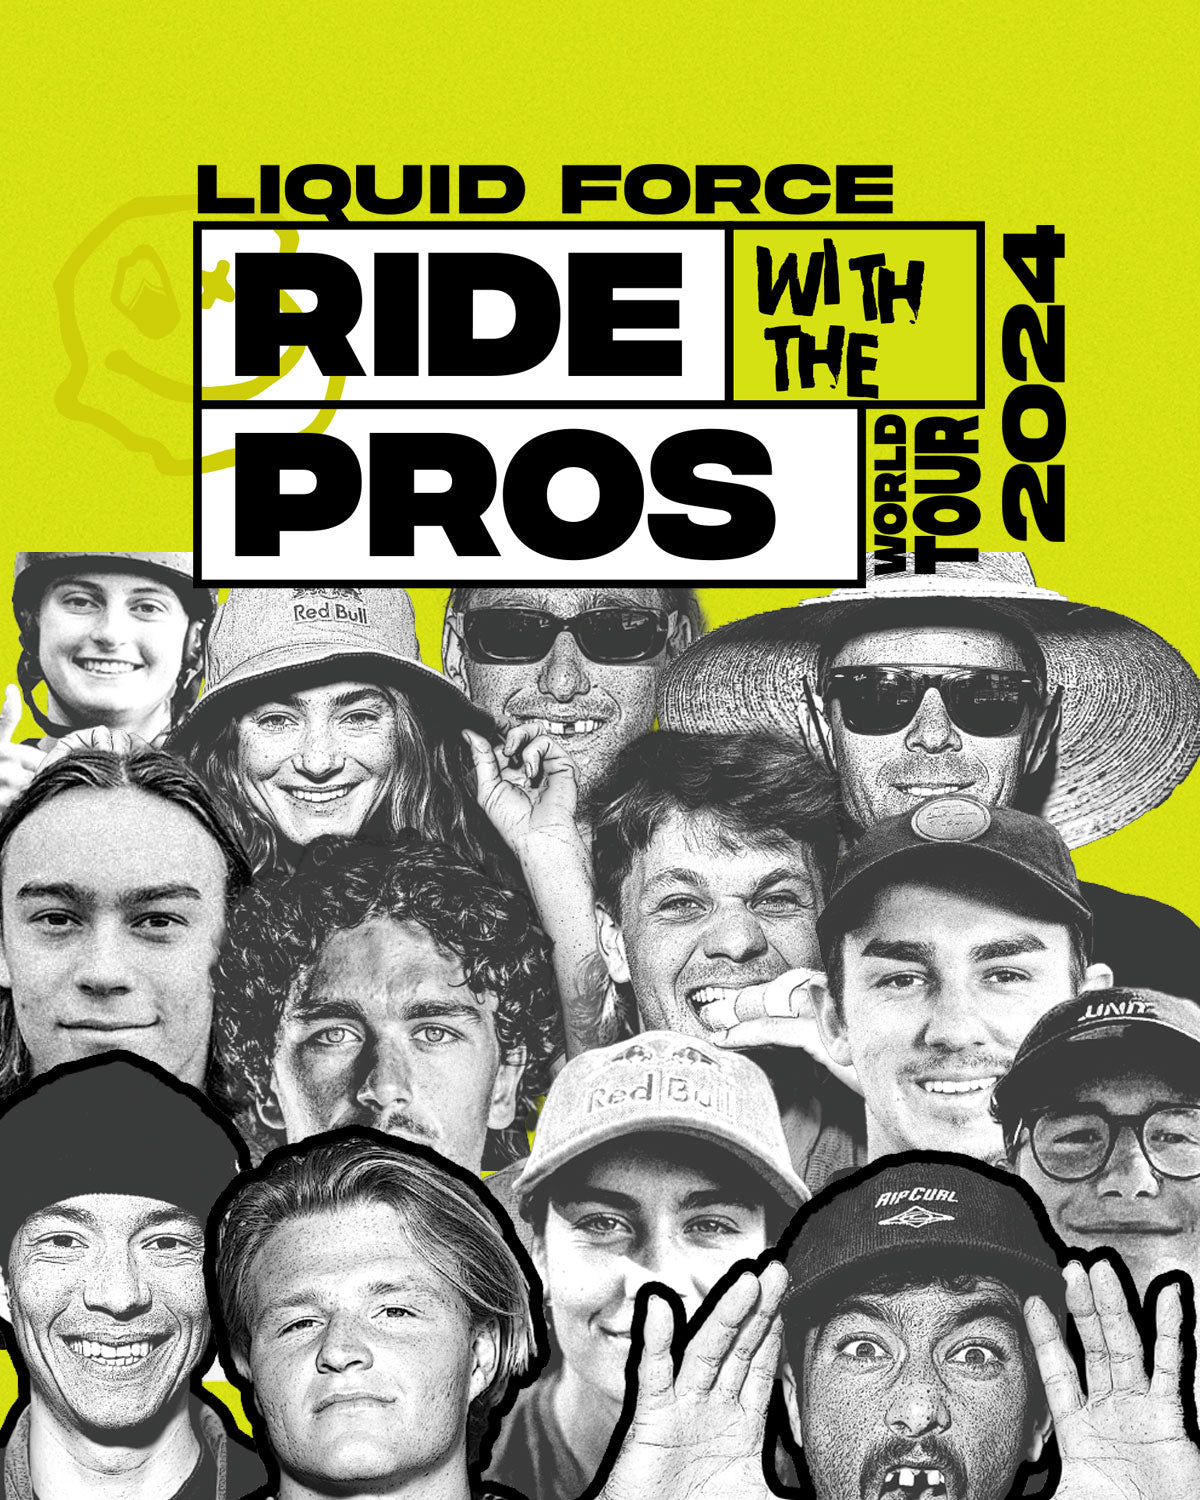 Liquid Force Ride with the Pros